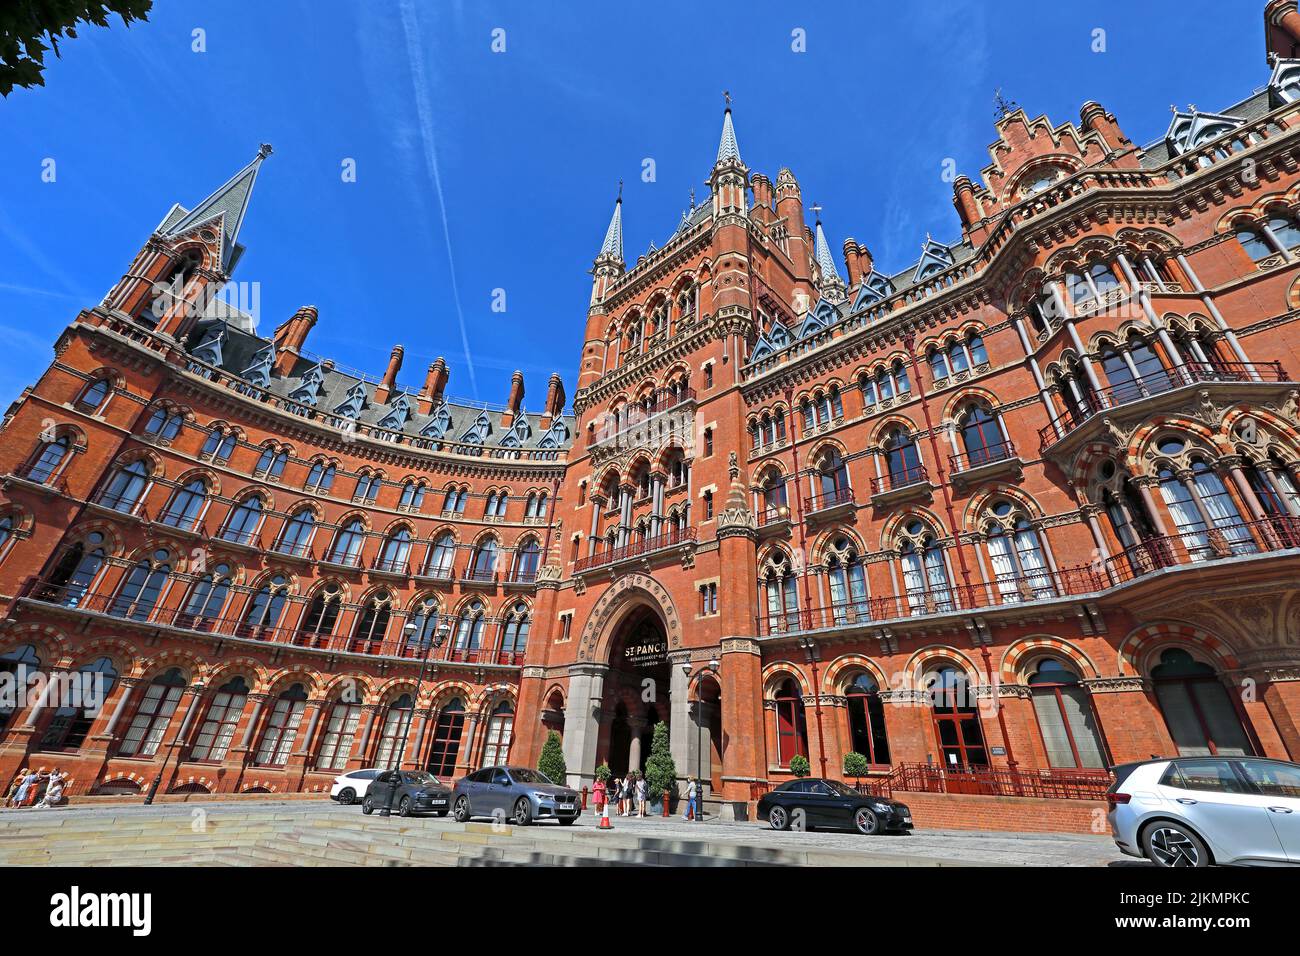 Spectacular Victorian architecture at St Pancras Renaissance station hotel, and hotel London, England, UK, NW1 2AR Stock Photo